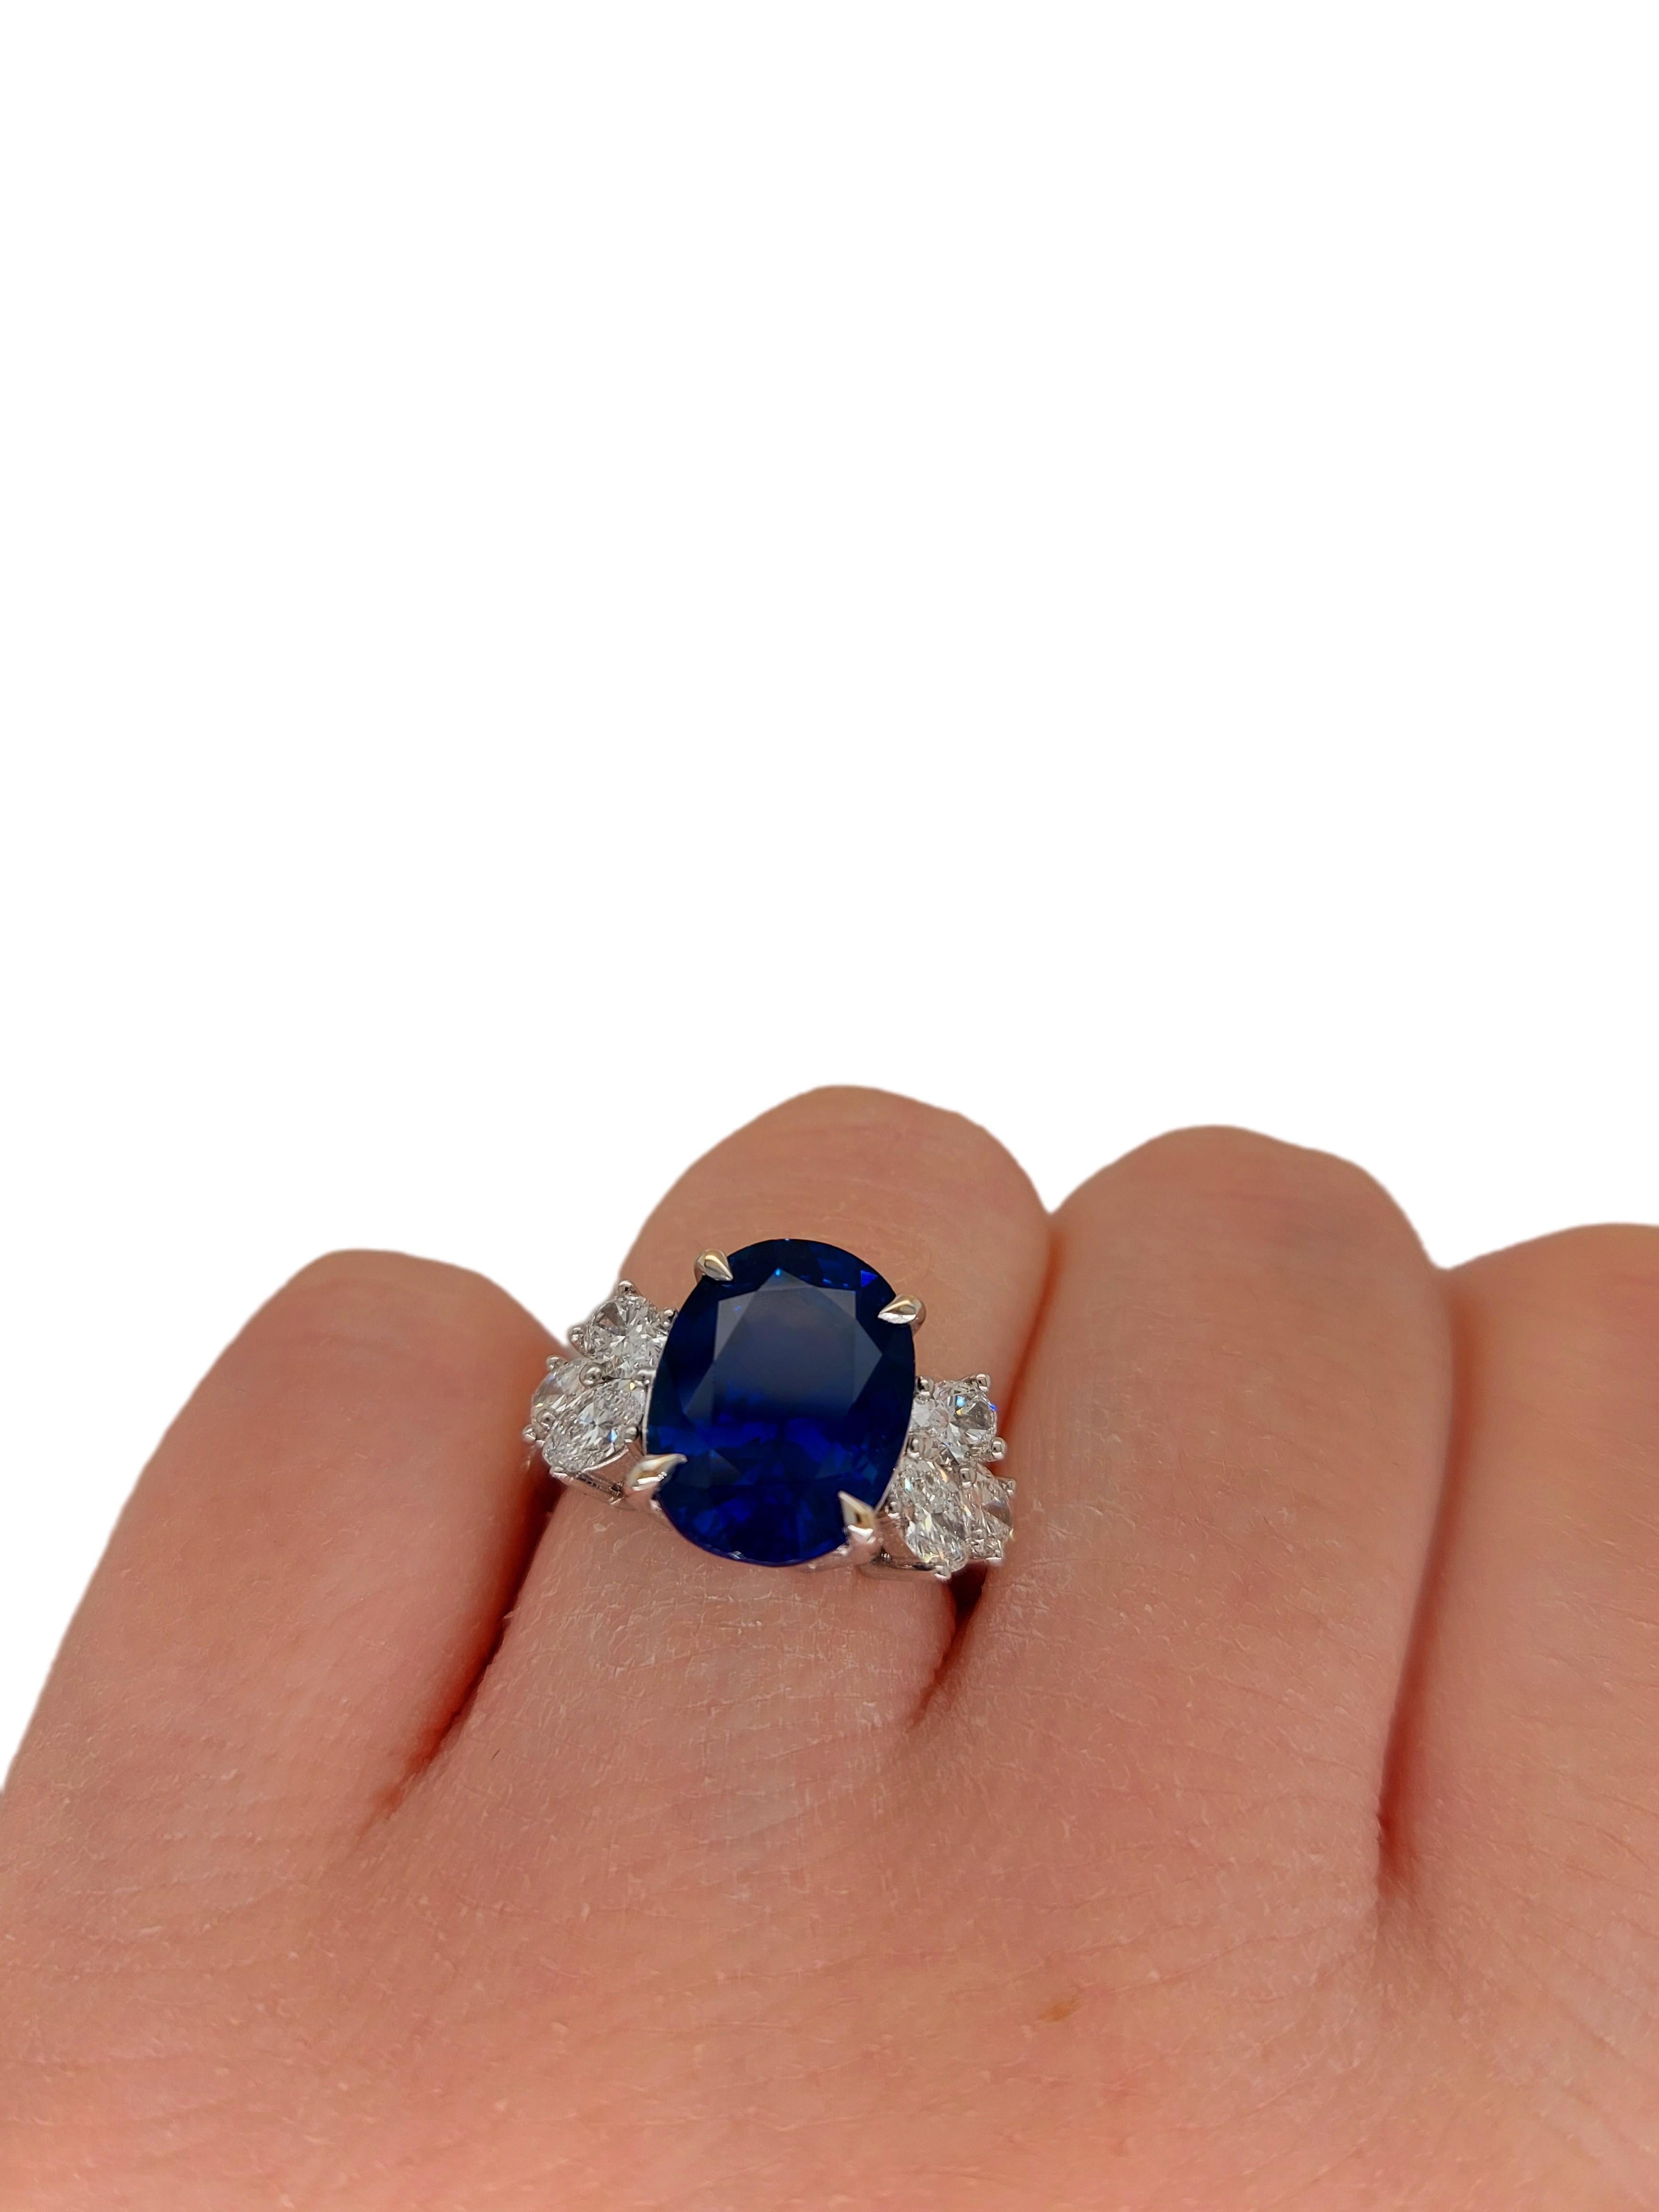 18 Karat White Gold Ring Set with a 7 Carat Sapphire and Diamonds 13